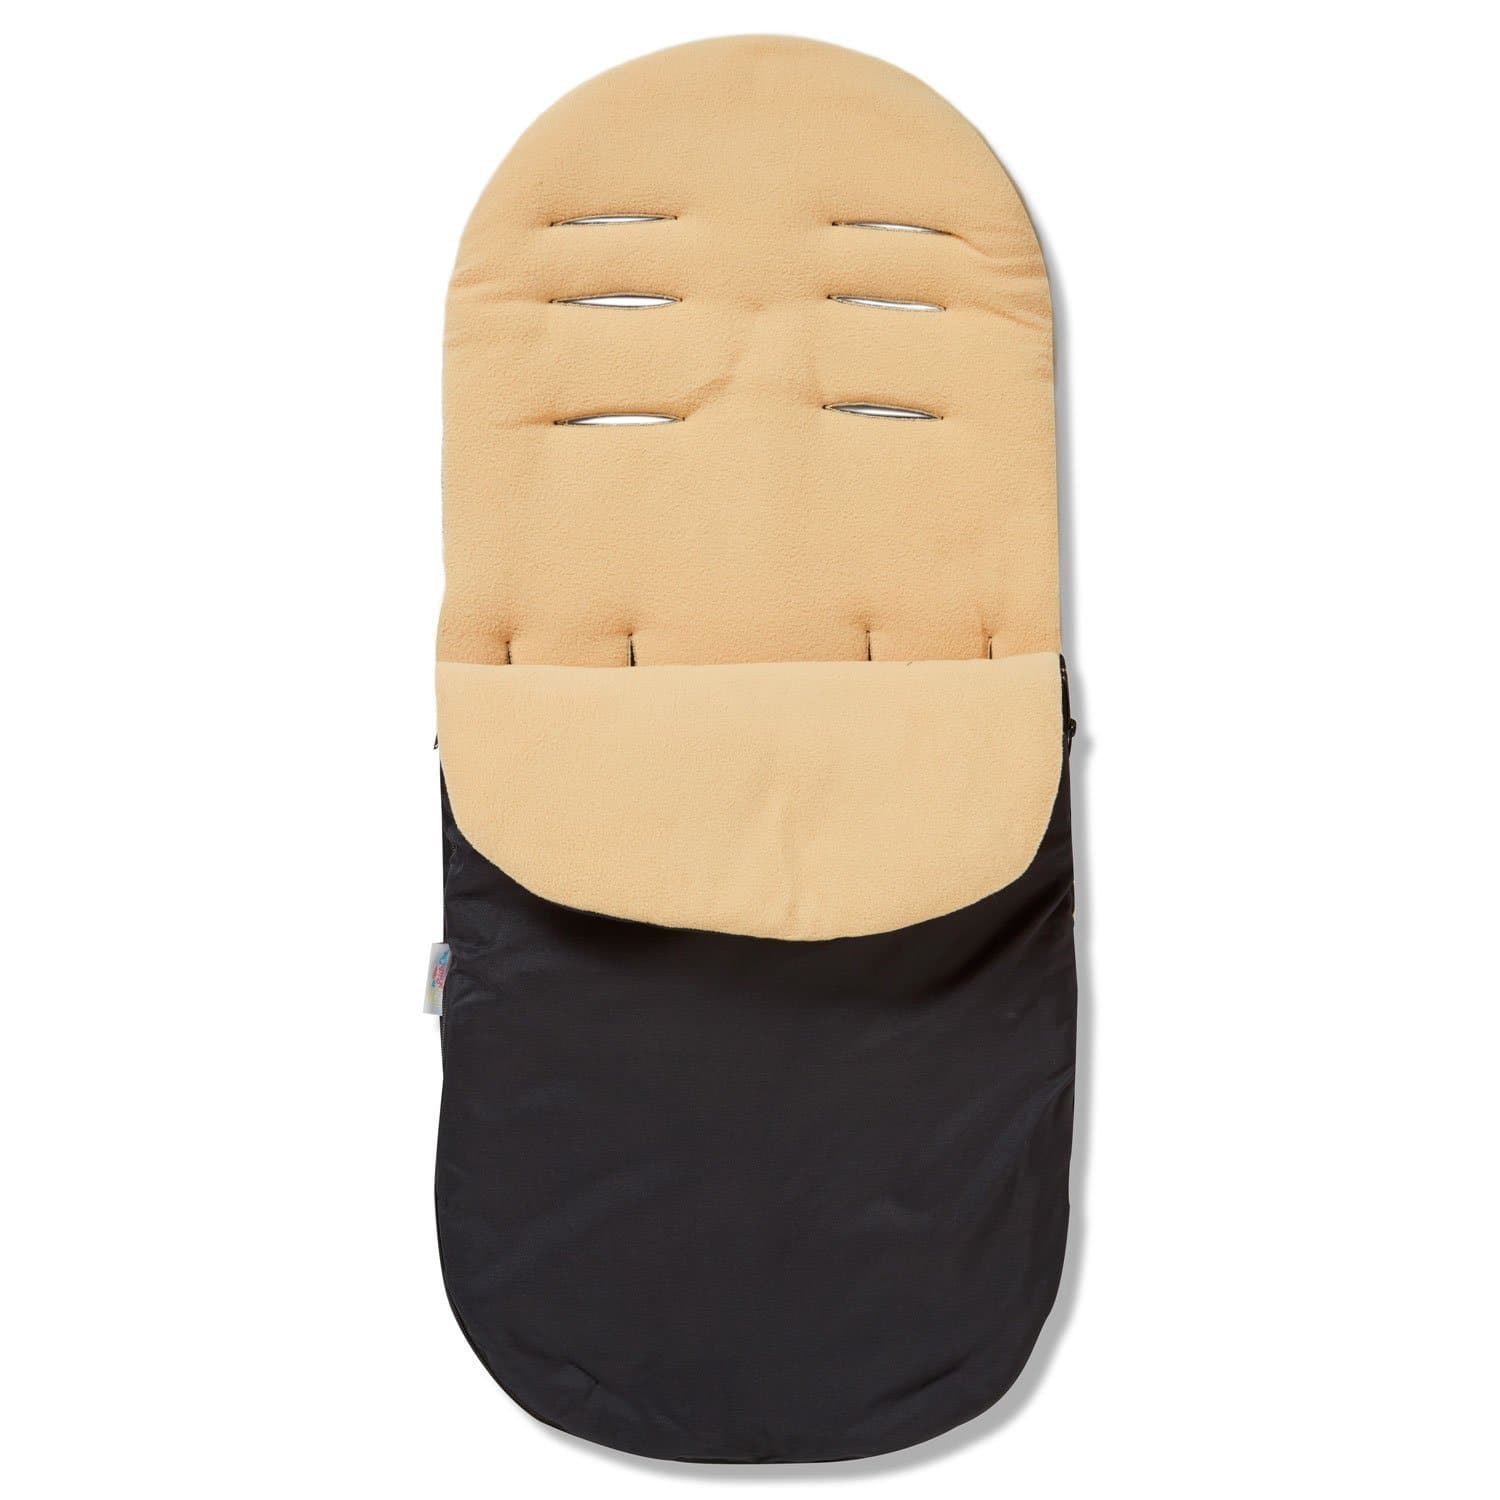 Footmuff / Cosy Toes Compatible with Mee-Go - Sand / Fits All Models | For Your Little One